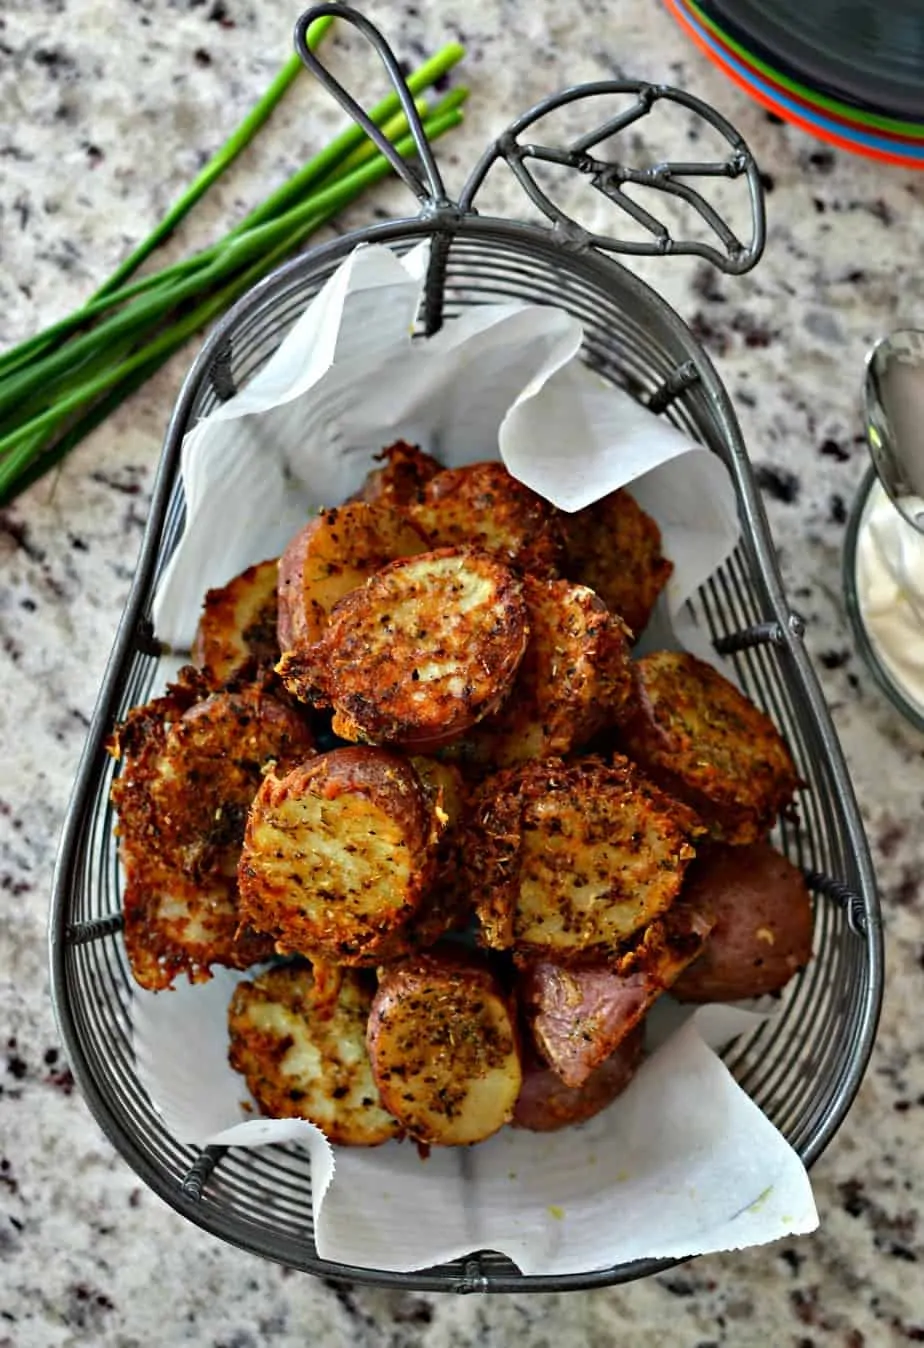 Roasted Red Potatoes are easy, quick and delicious making them the perfect side for chicken, fish, beef and pork.